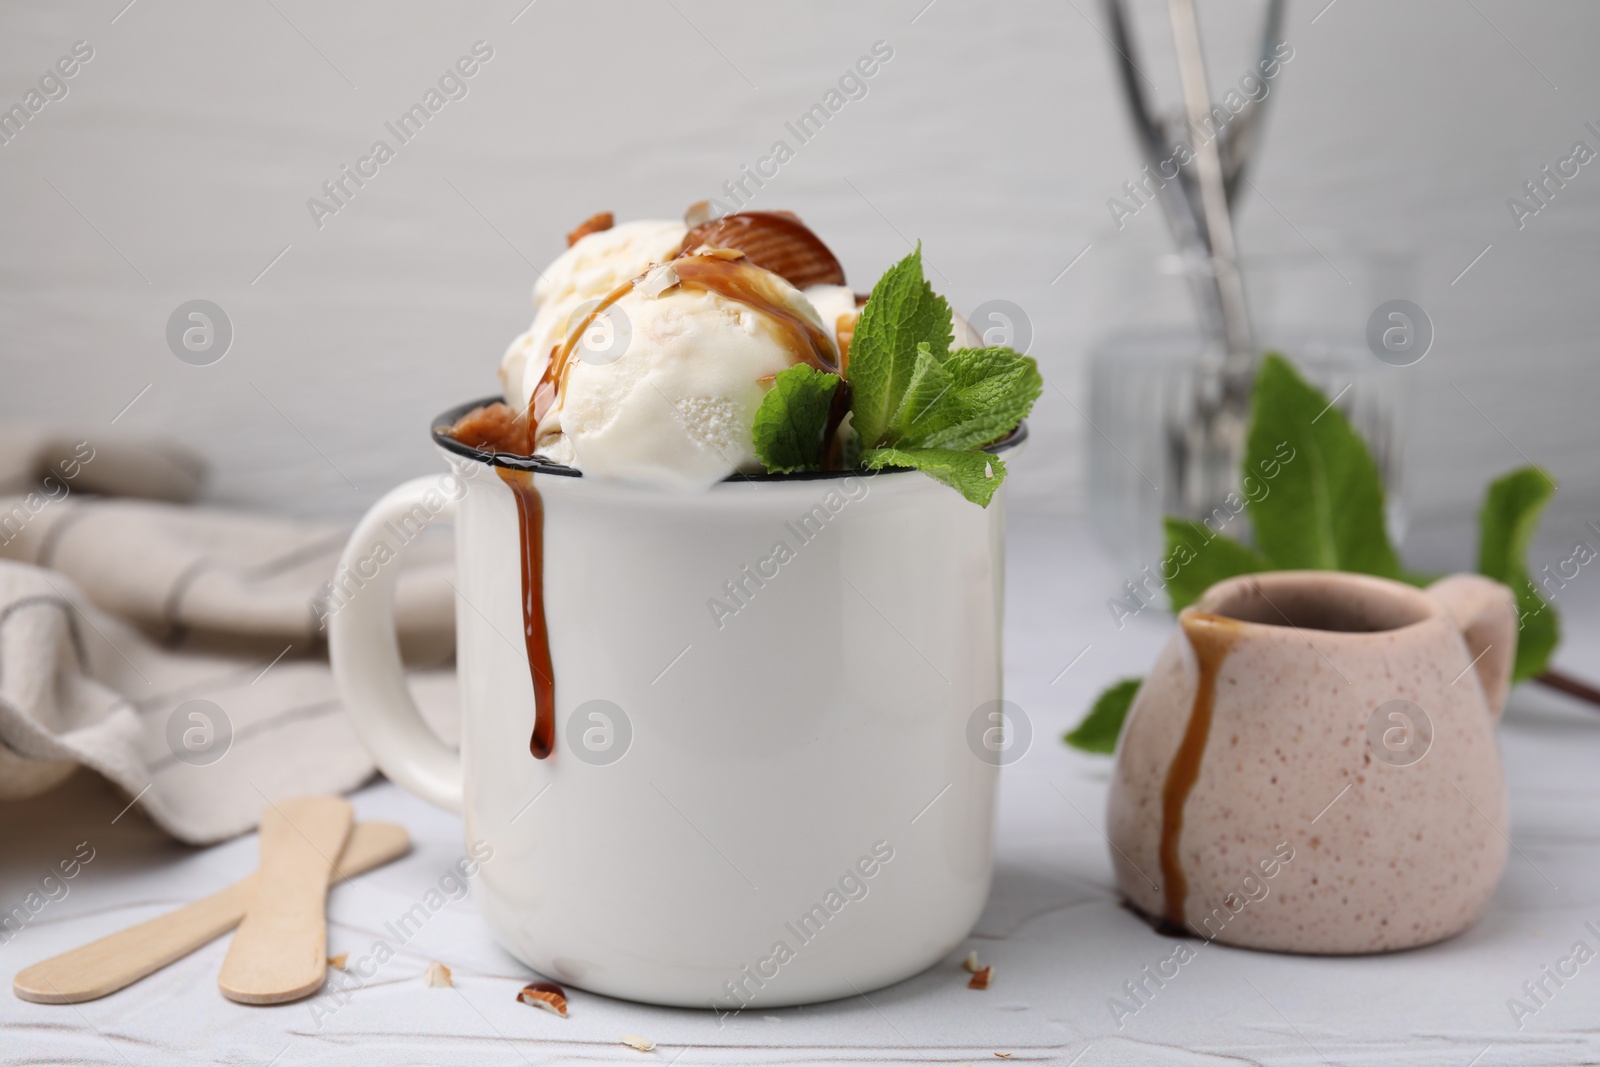 Photo of Scoops of ice cream with caramel sauce, candies and mint leaves on white textured table, closeup